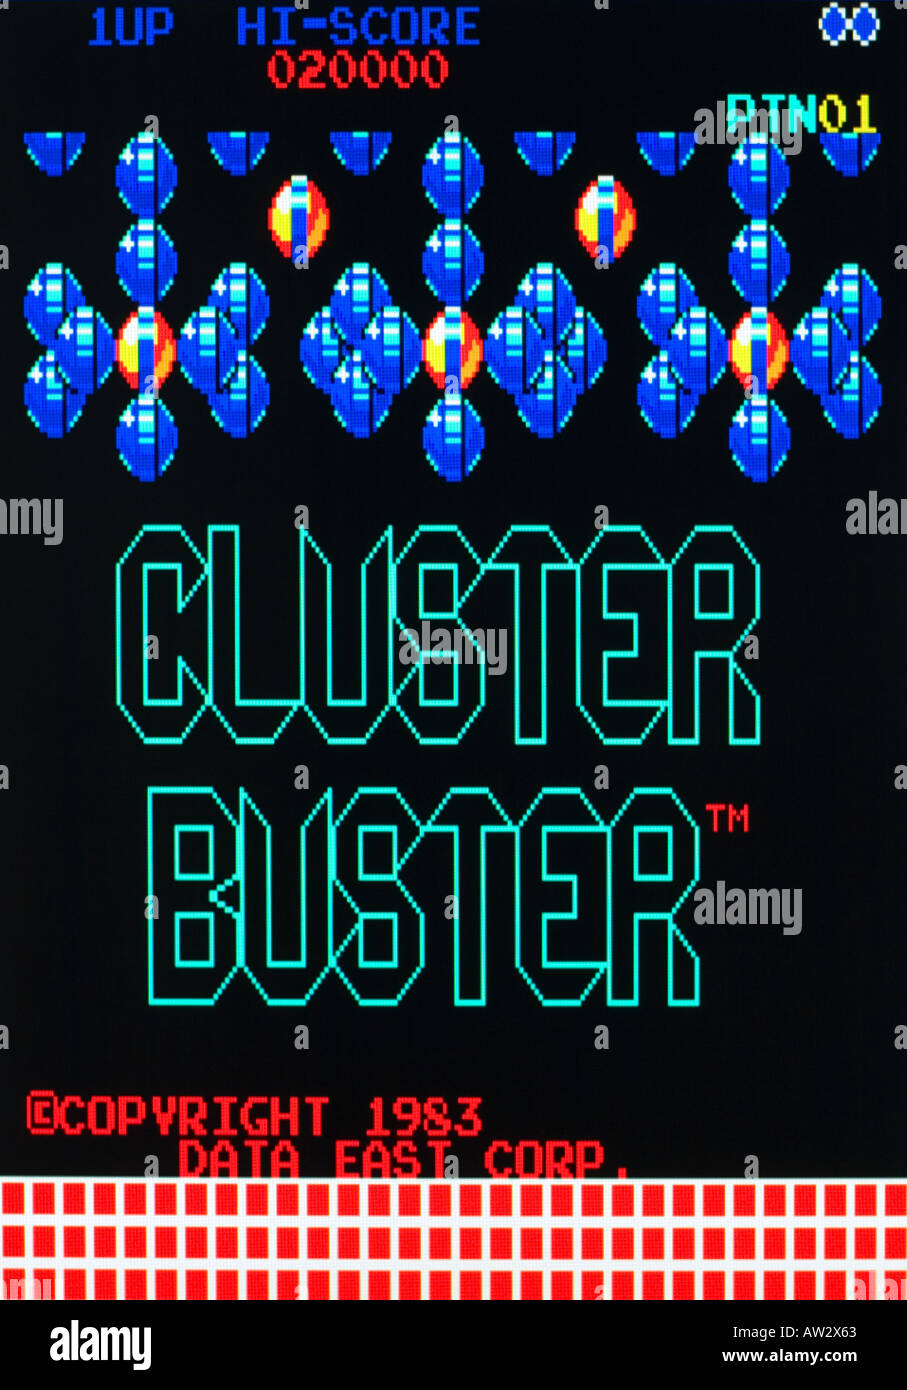 Graplop aka Cluster Buster Data East 1983 Vintage arcade videogame screen shot - EDITORIAL USE ONLY Stock Photo